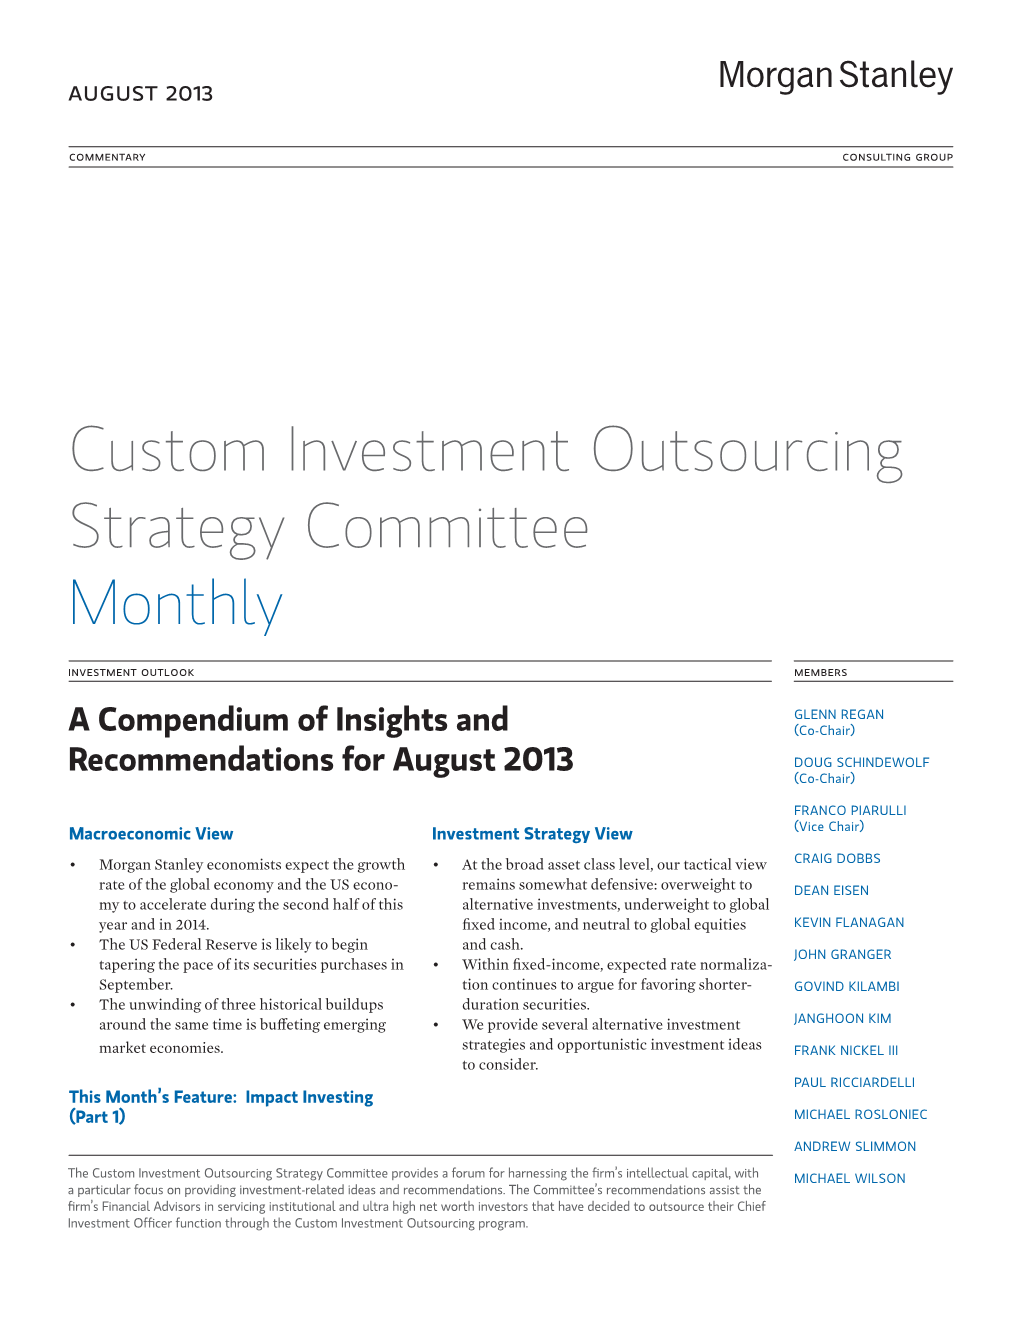 Custom Investment Outsourcing Strategy Committee Monthly Investment Outlook Members